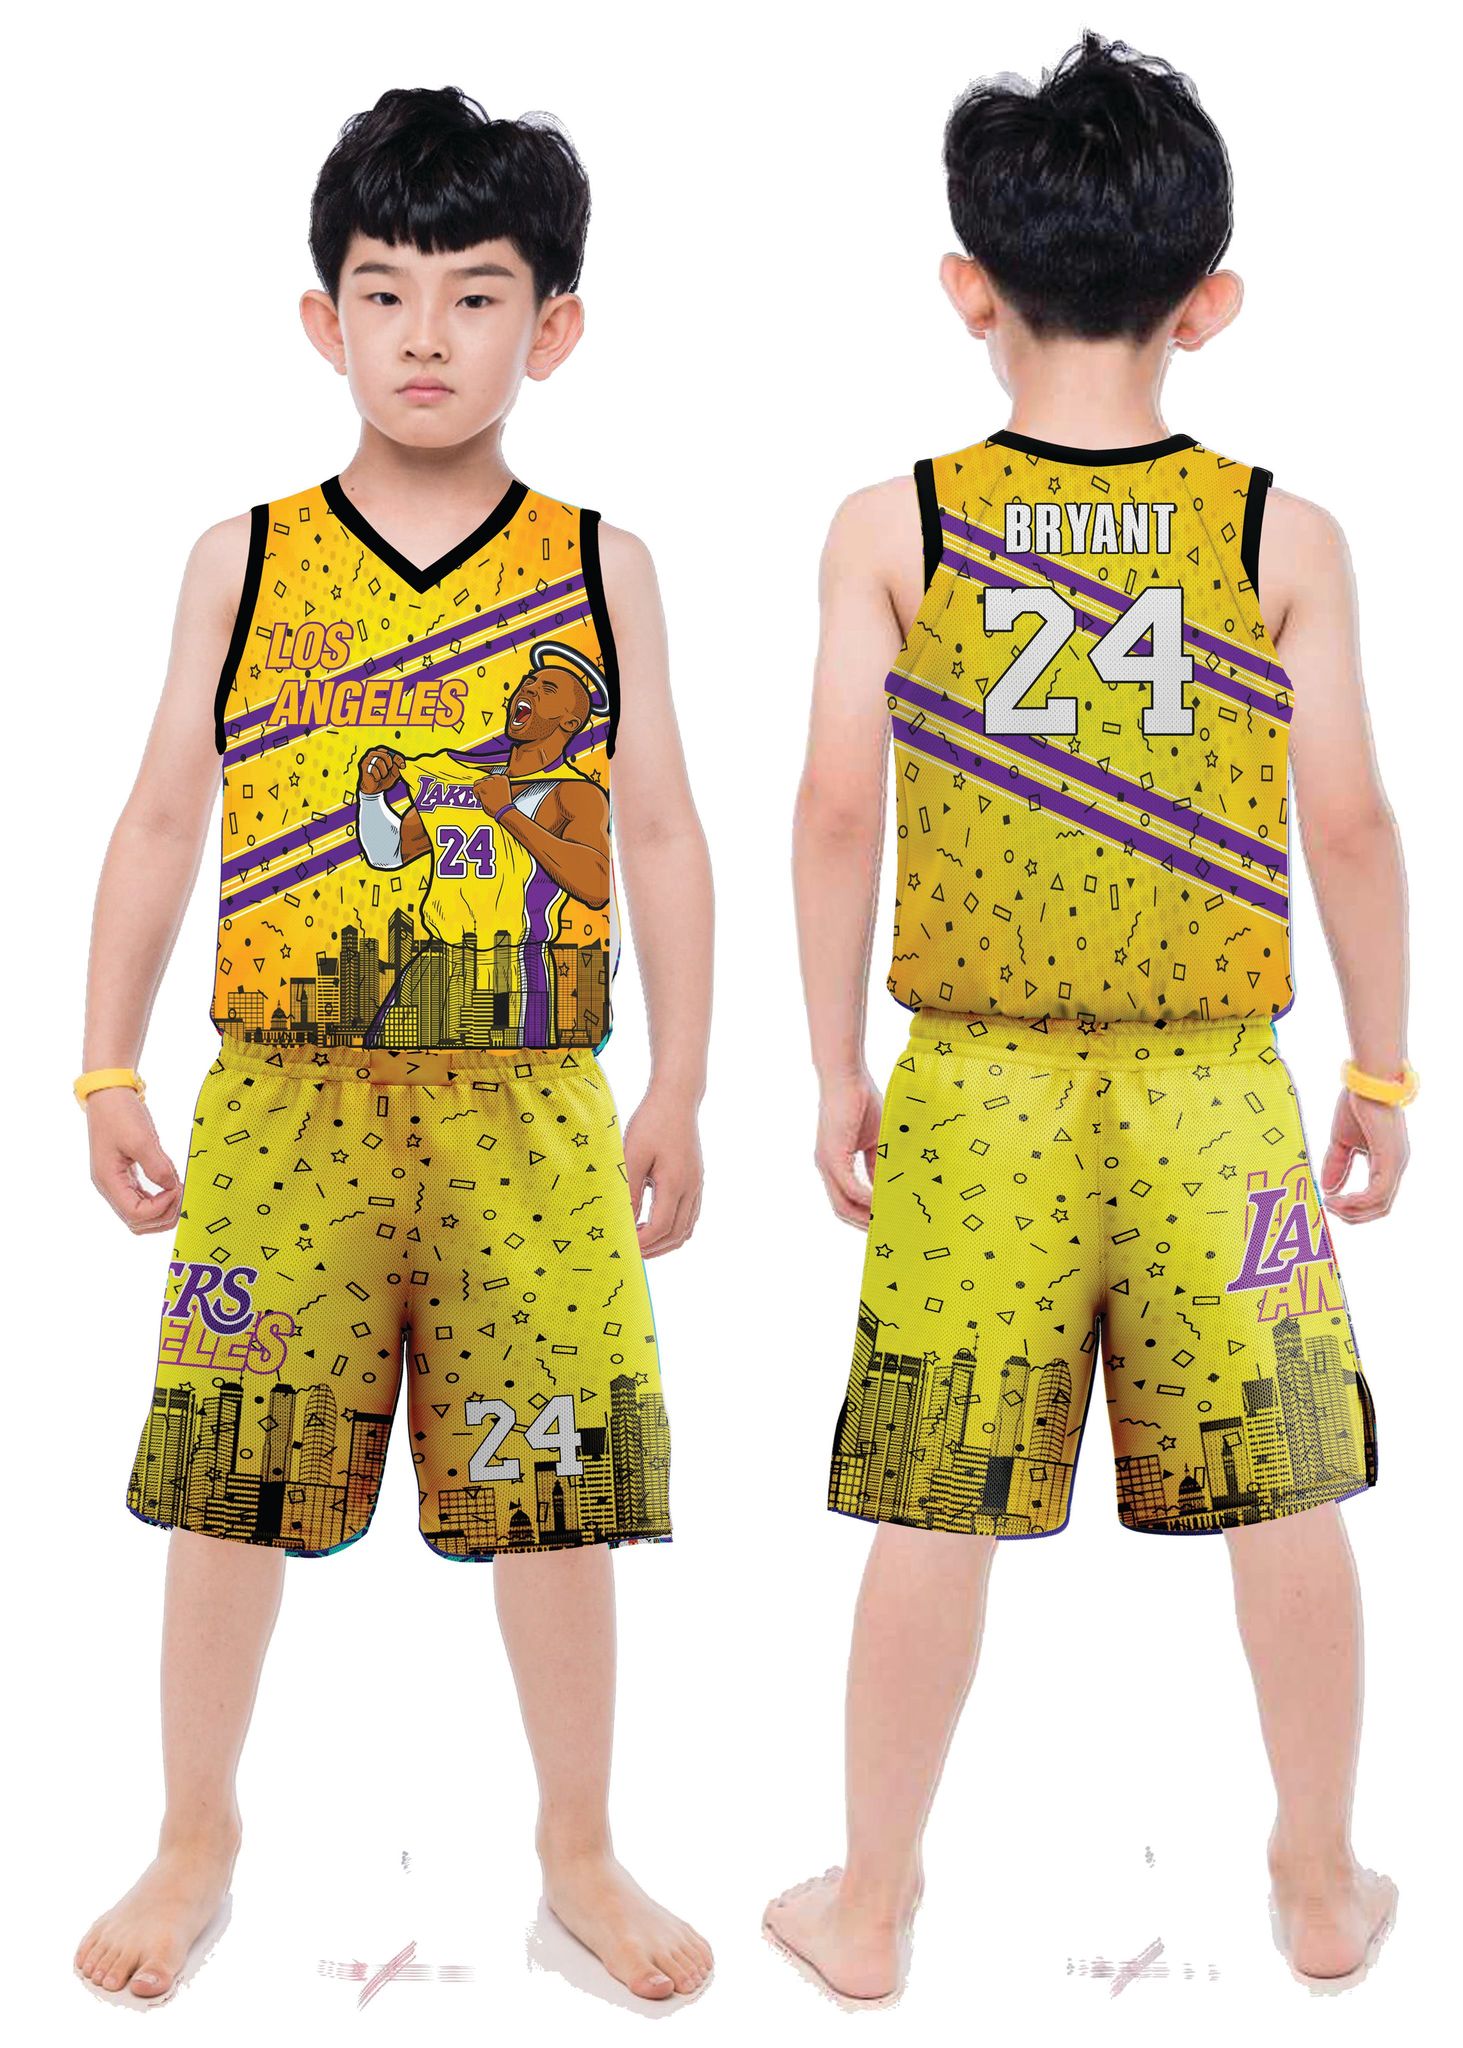 LAKERS 17 KIDS SIZE TERNO JERSEY FREE CUSTOMIZE OF NAME & NUMBER